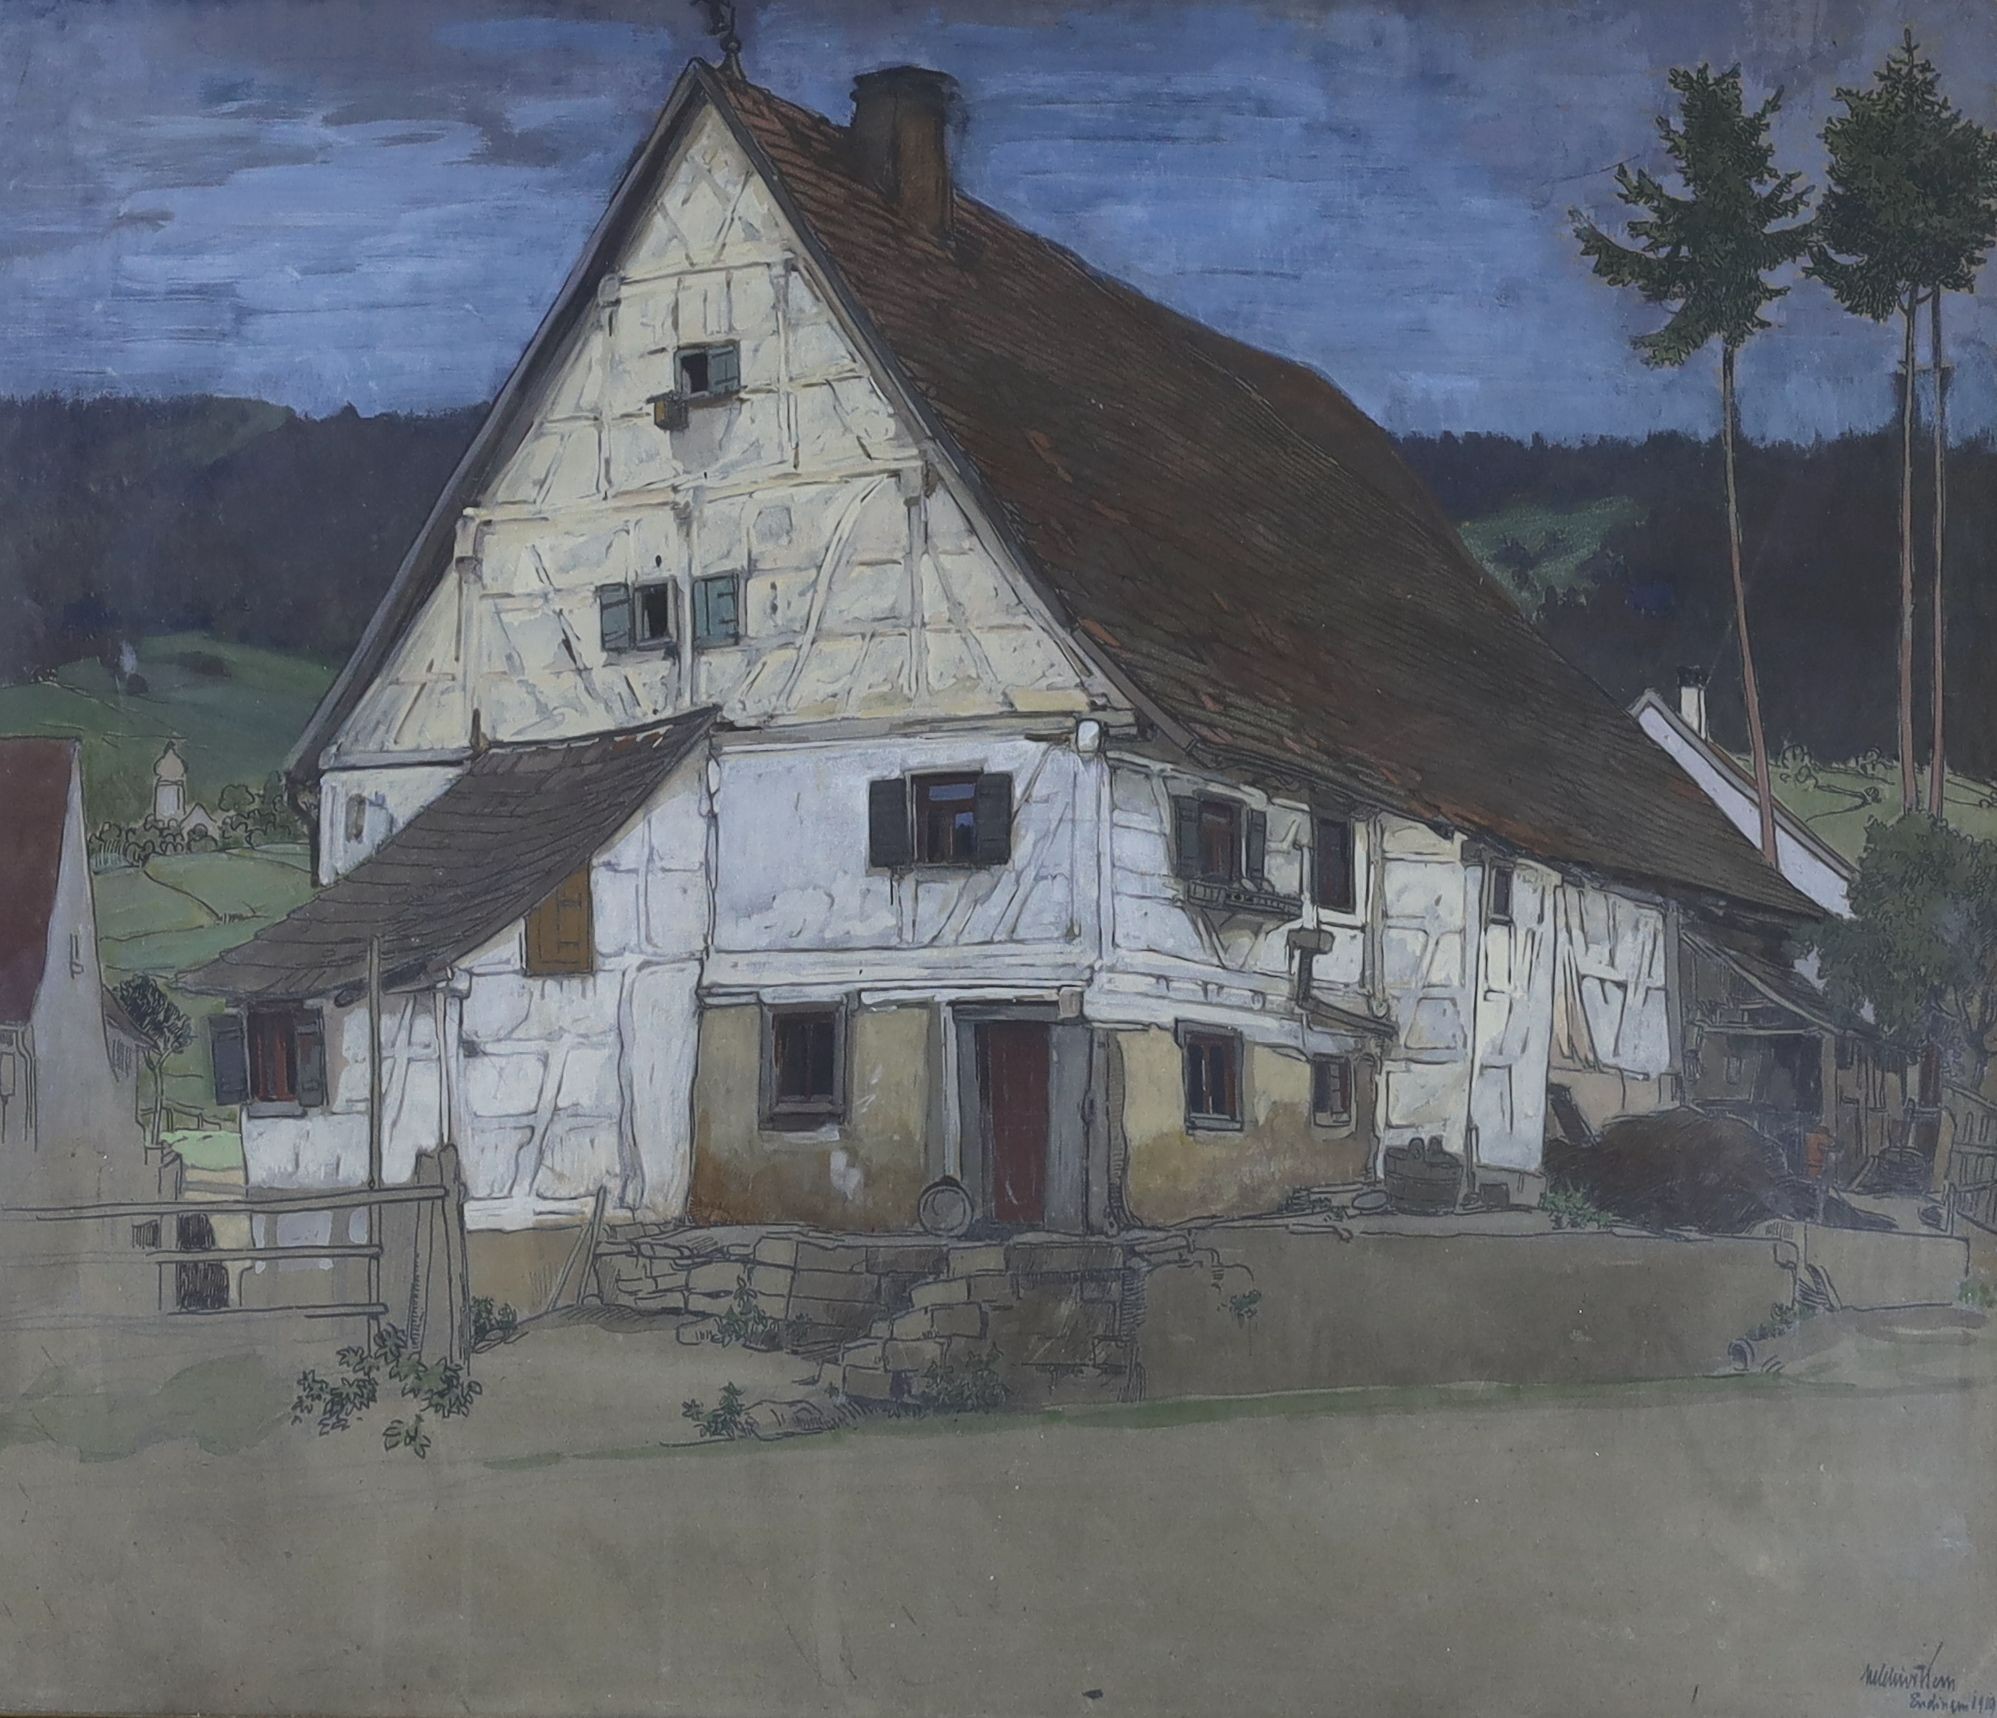 Melchior Kern (1872-1947), ink and watercolour on buff paper, Bavarian House, signed and dated 1919, 42 x 49cm